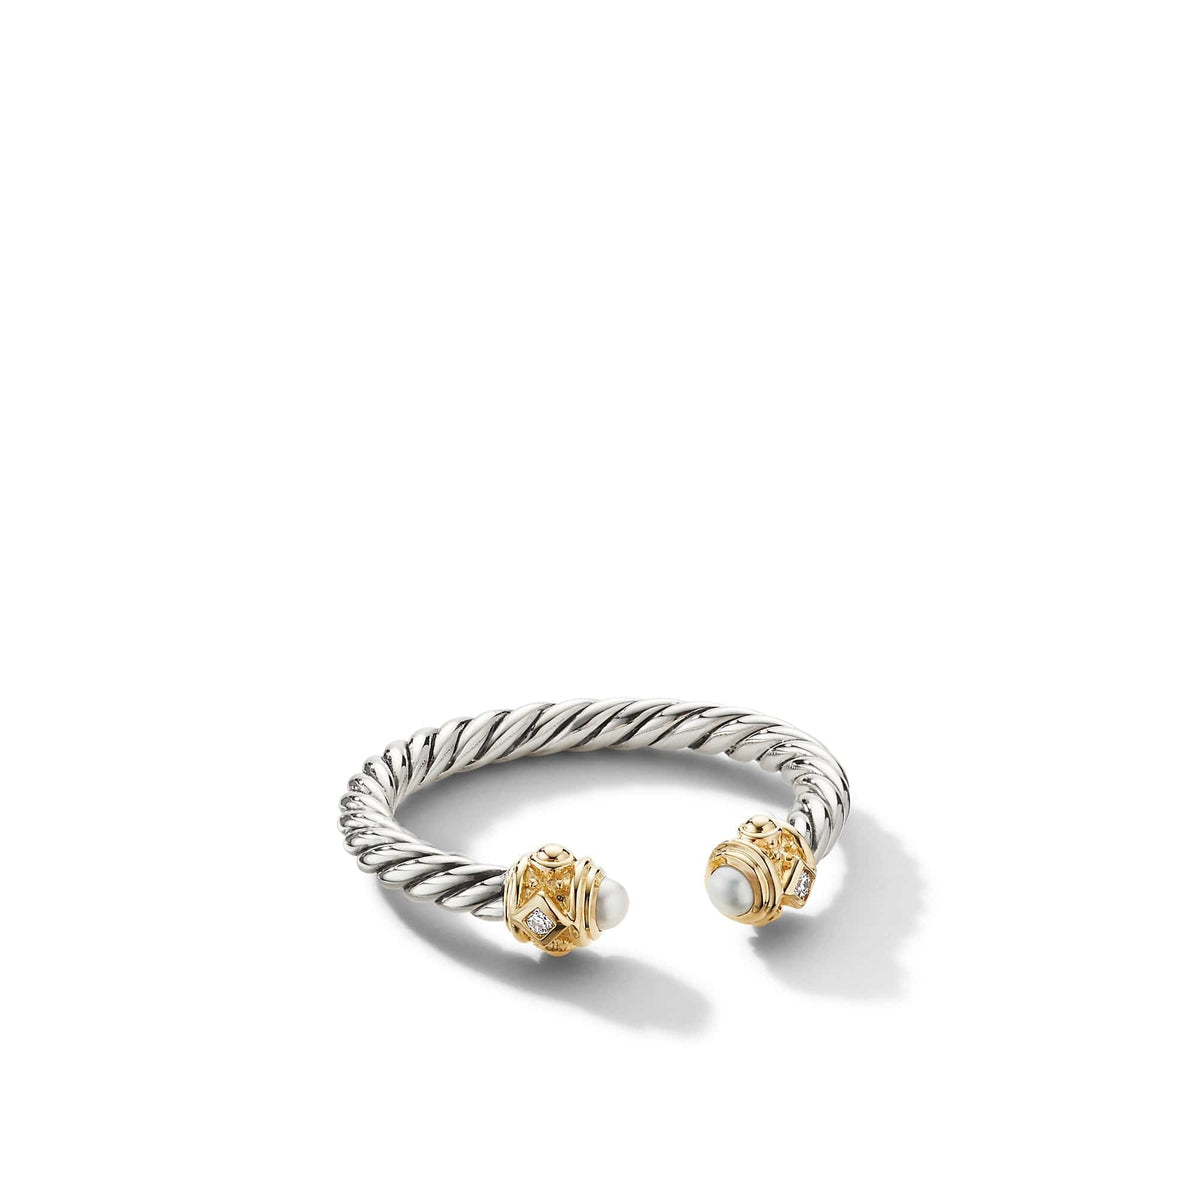 Renaissance Ring in Sterling Silver with Pearls, 14K Yellow Gold and Diamonds